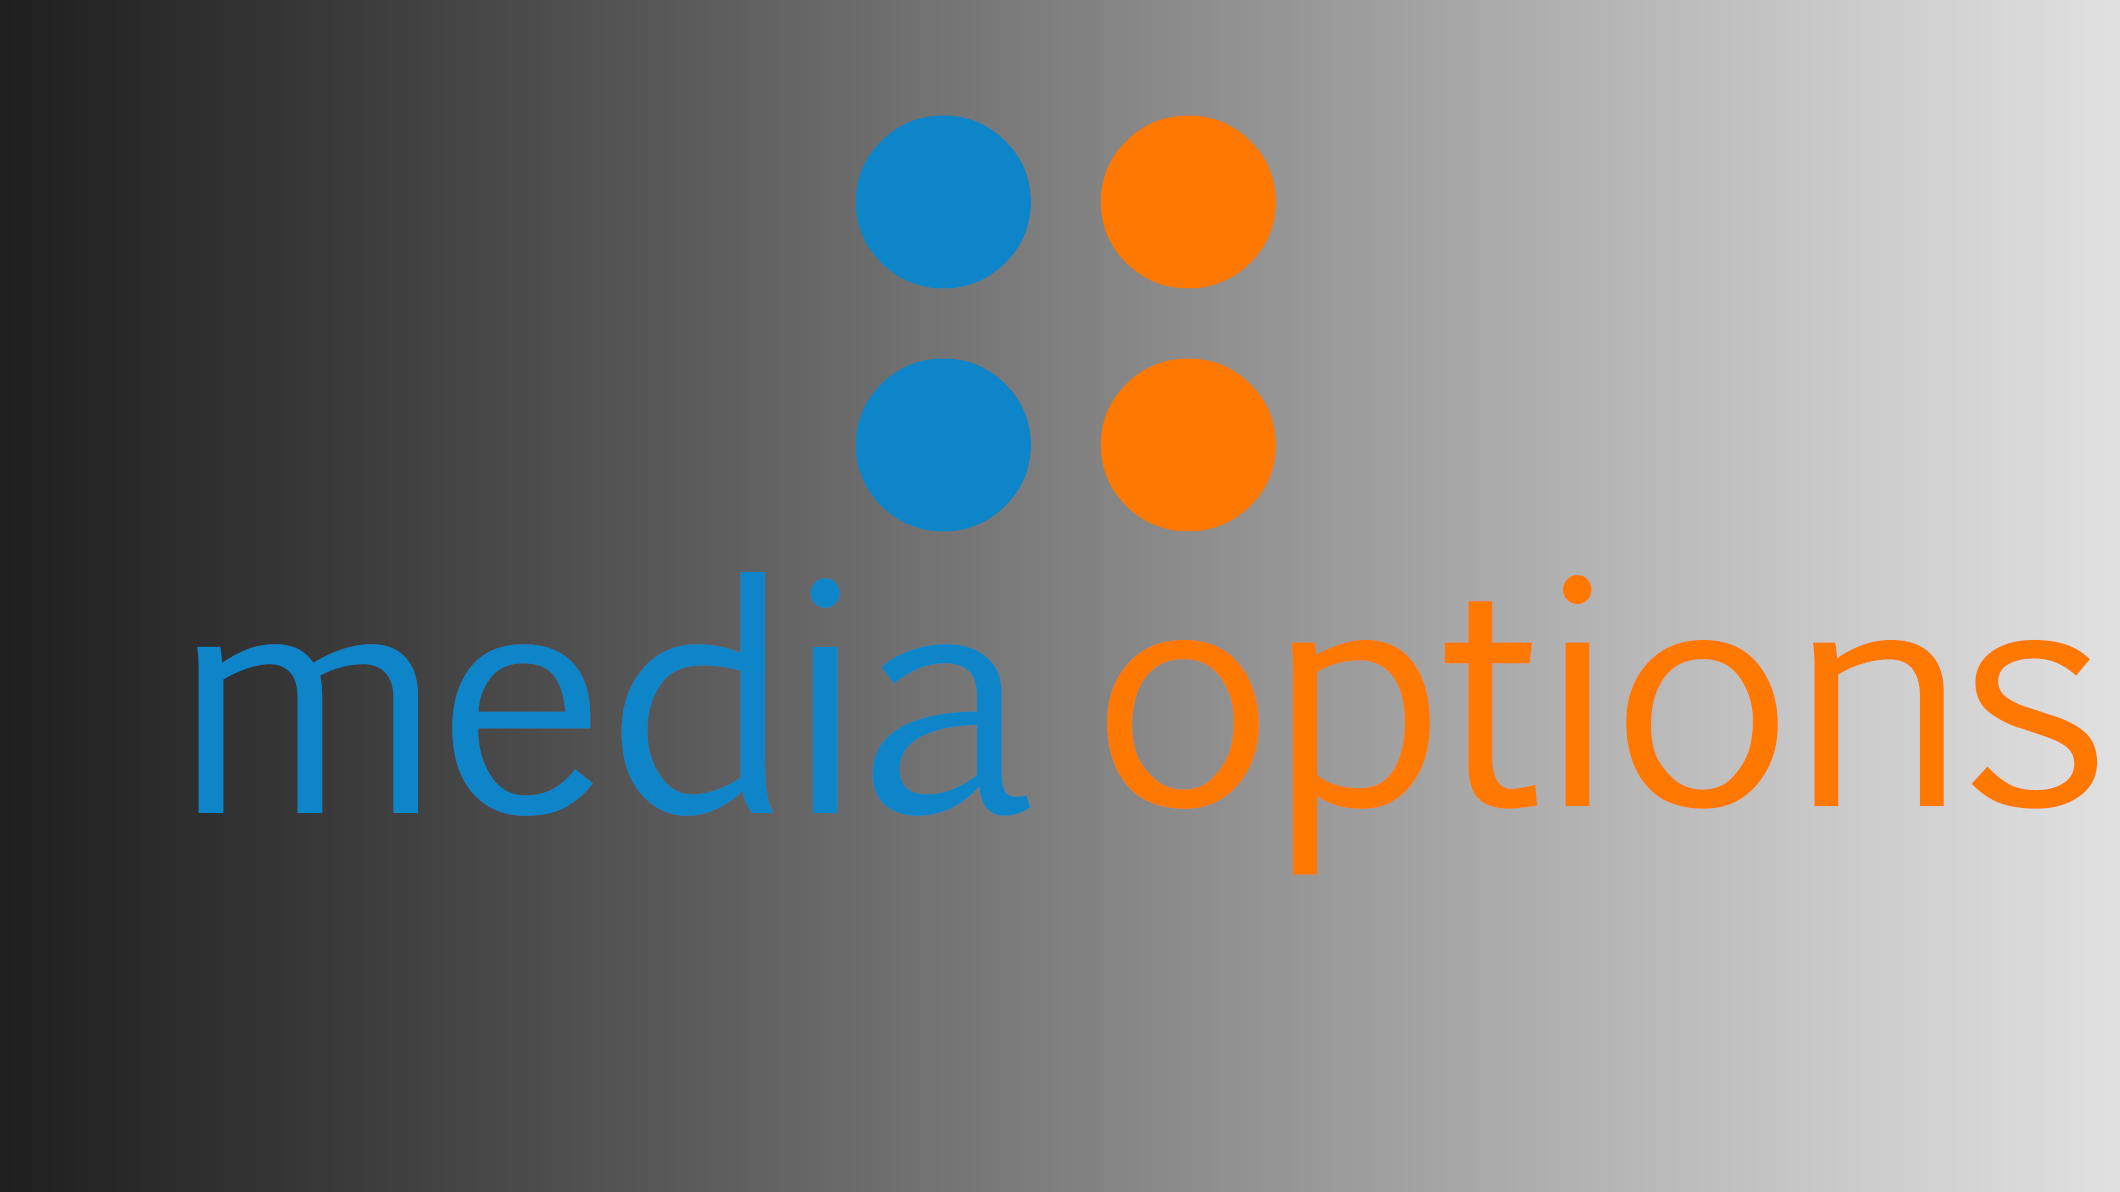 Media Options Domain Name Broker offers premium domains for sale and acquisition services for startups and companies seeking to increase their online presence.